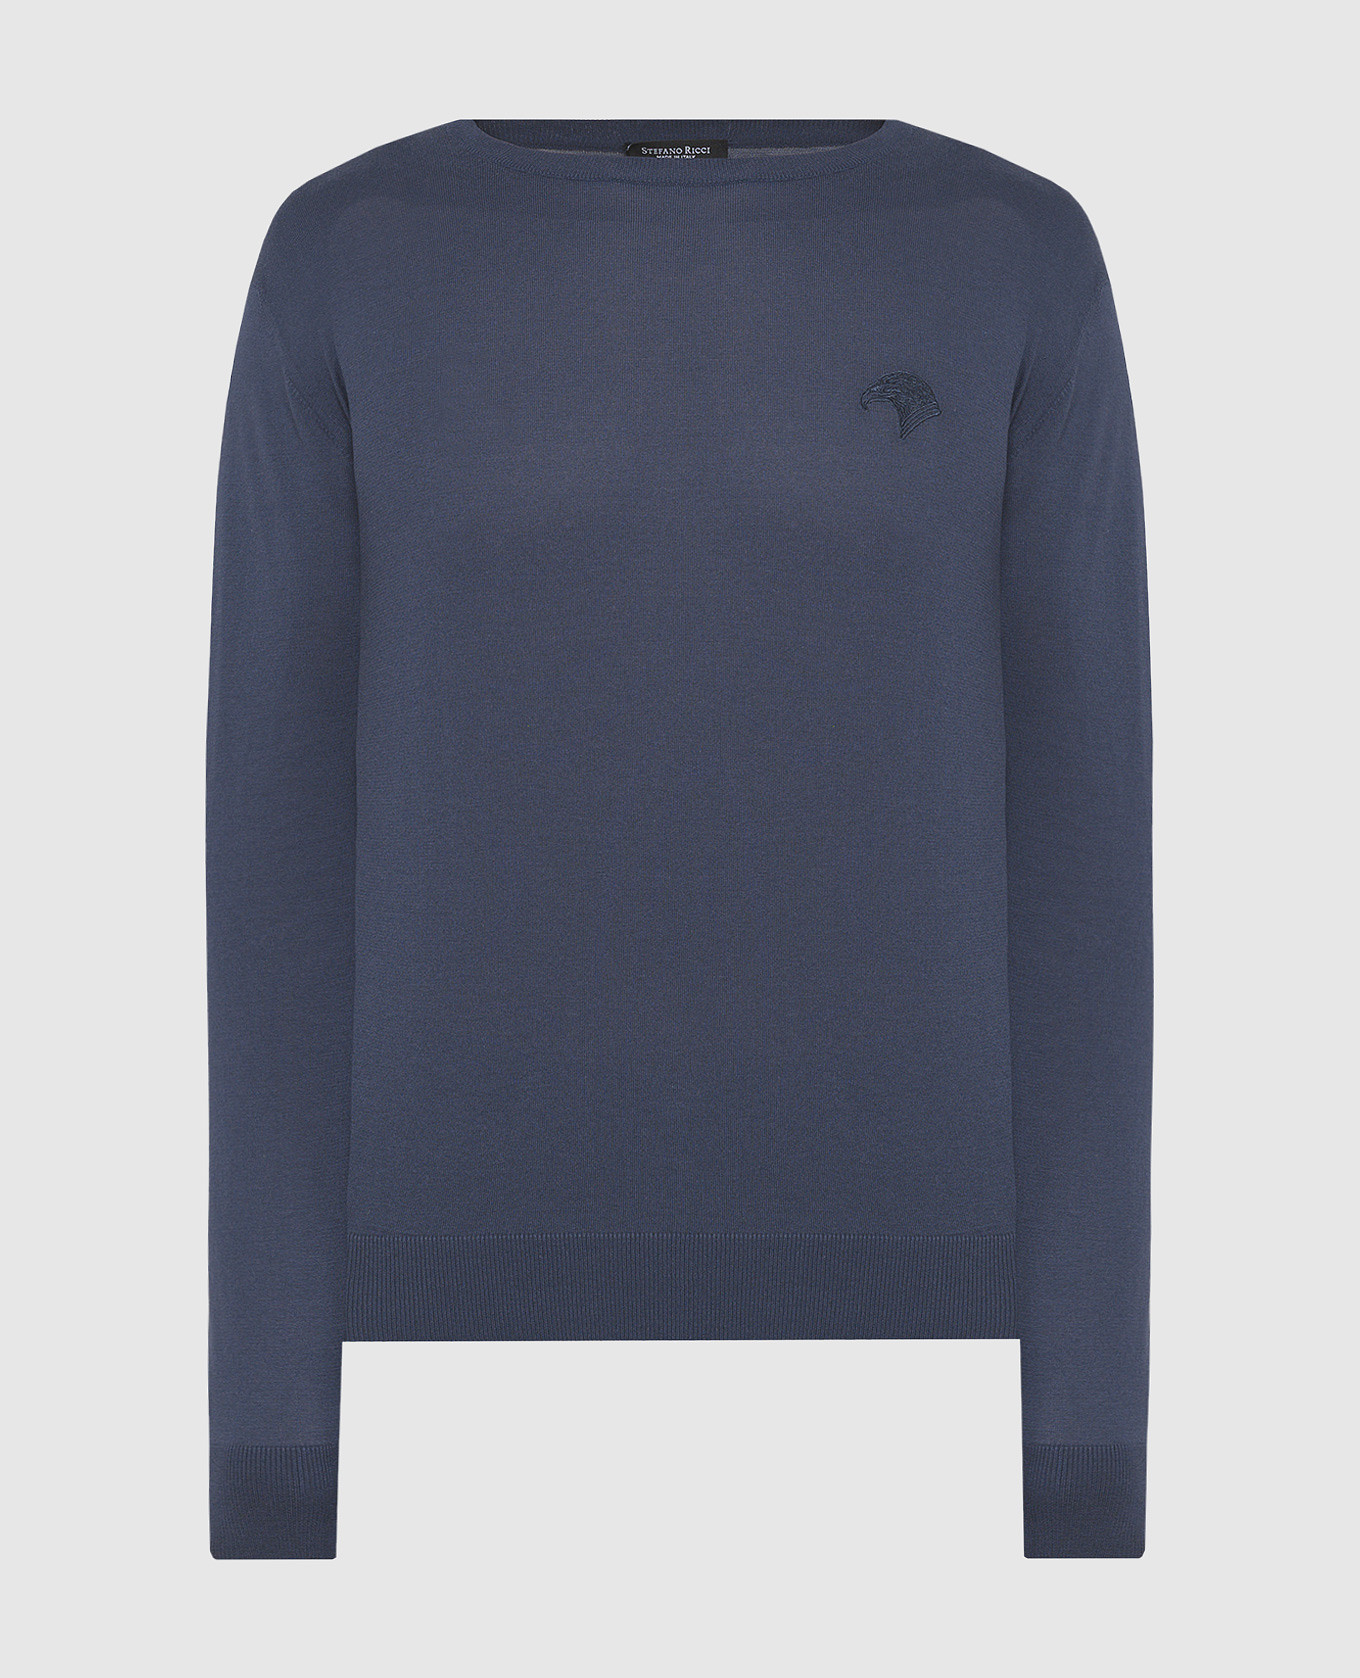 Blue jumper with logo emblem embroidery